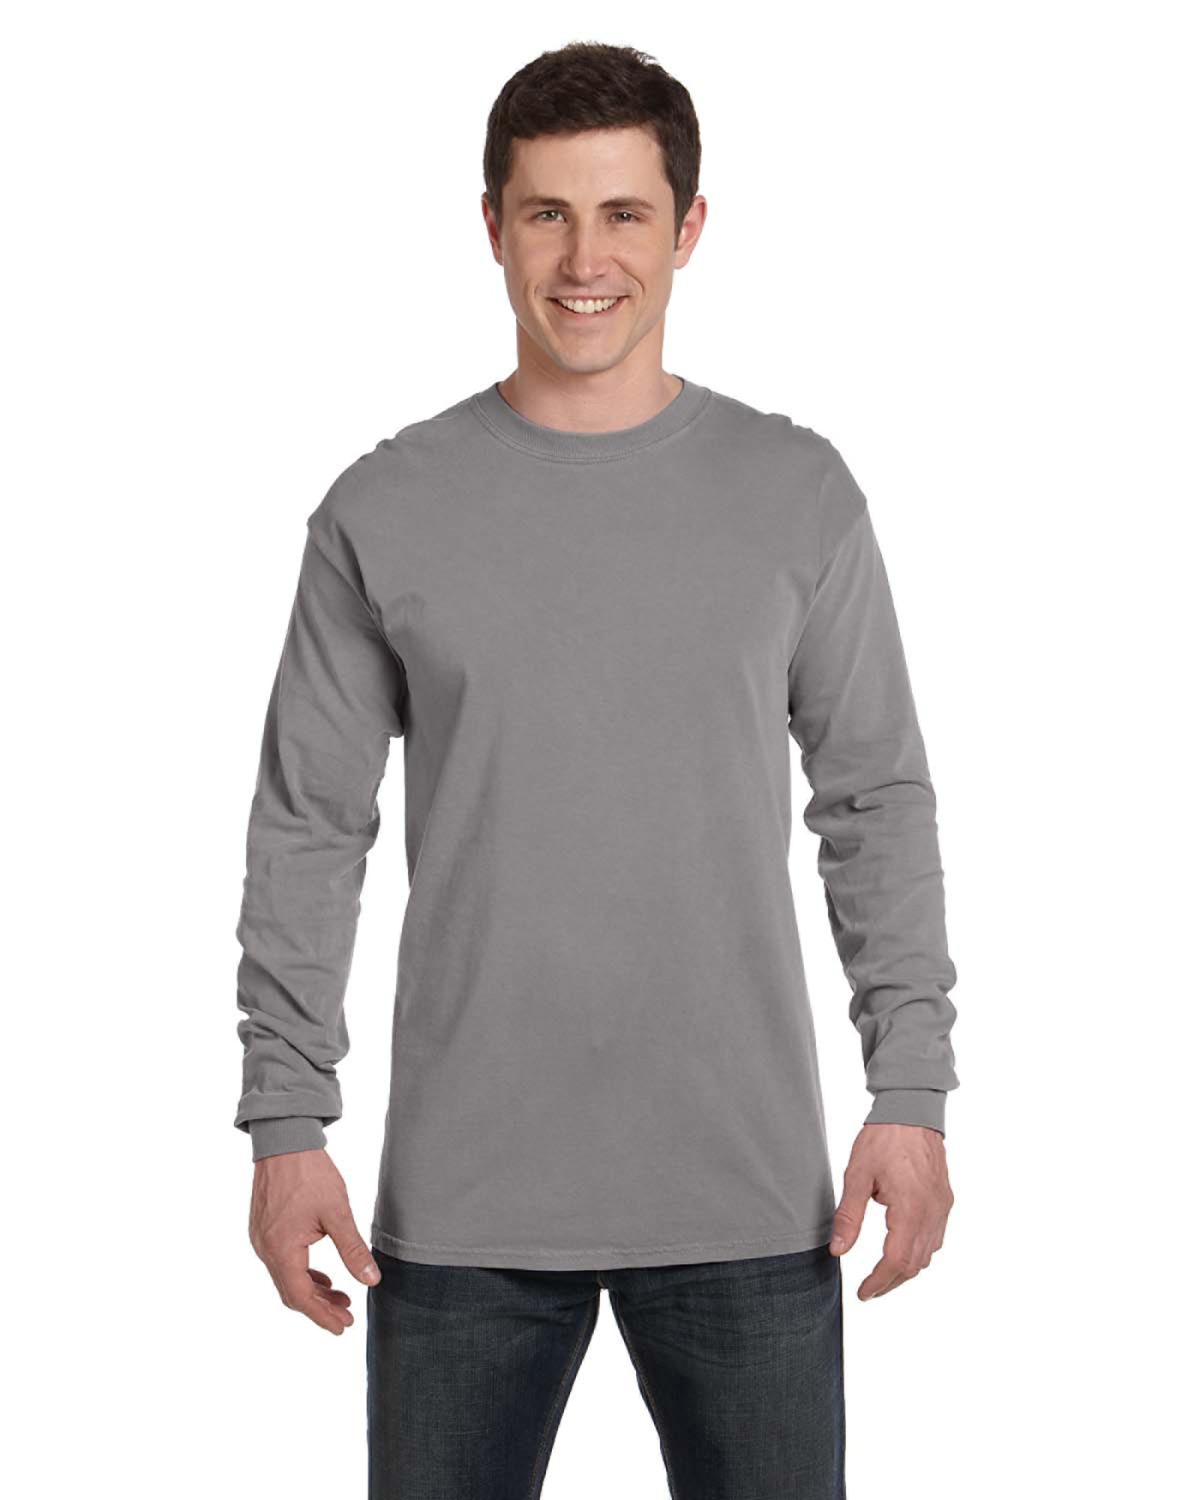 Next Level Adult Long-Sleeve Thermal N8201